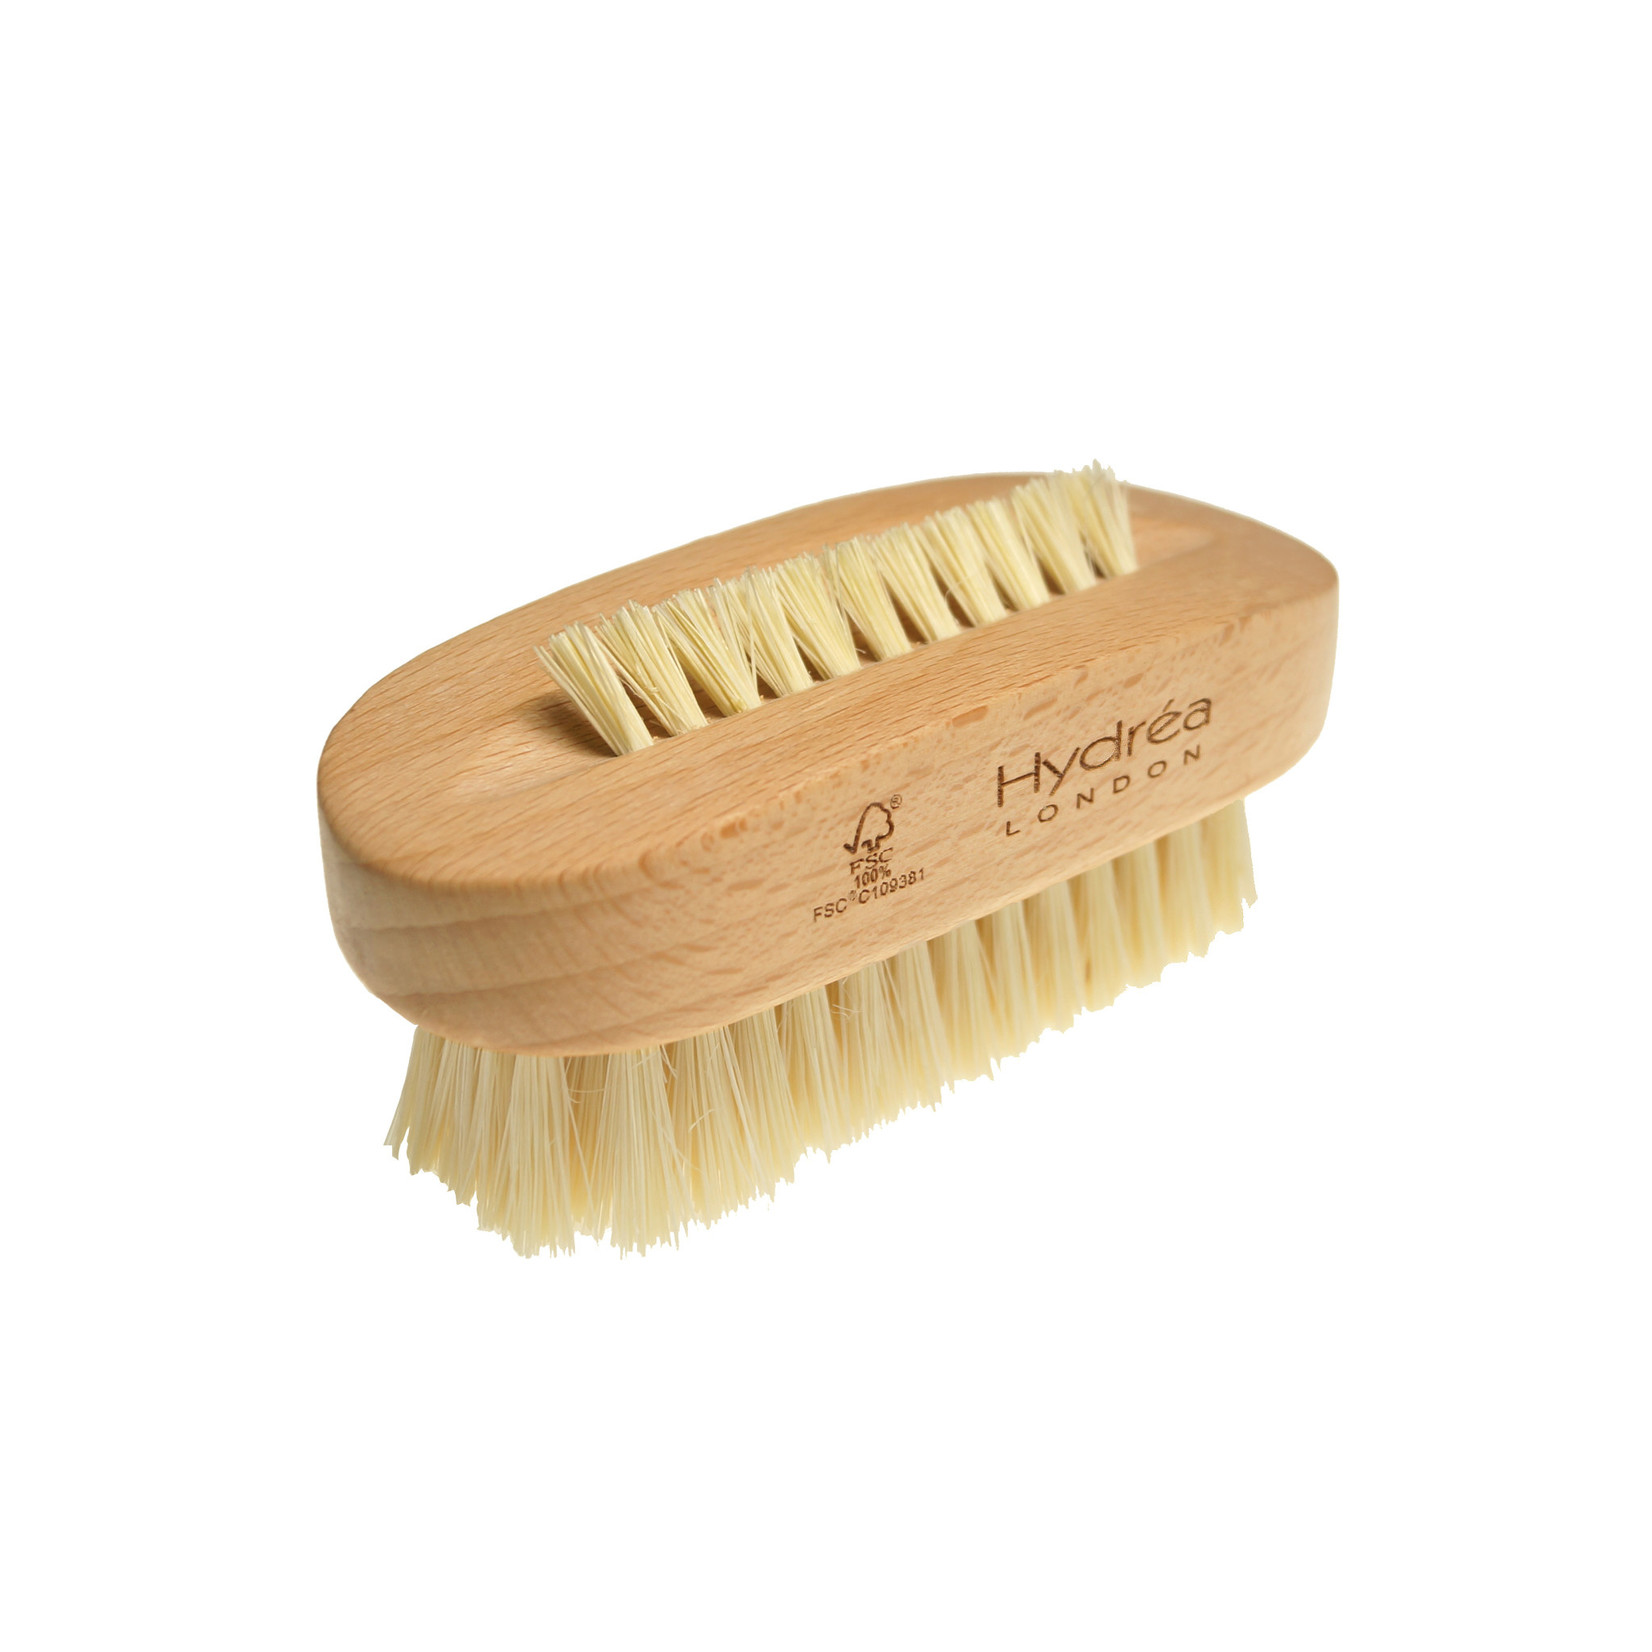 Hydrea Premium & Stylish Extra Tough duel sided Nail Brush with Cactus Bristles